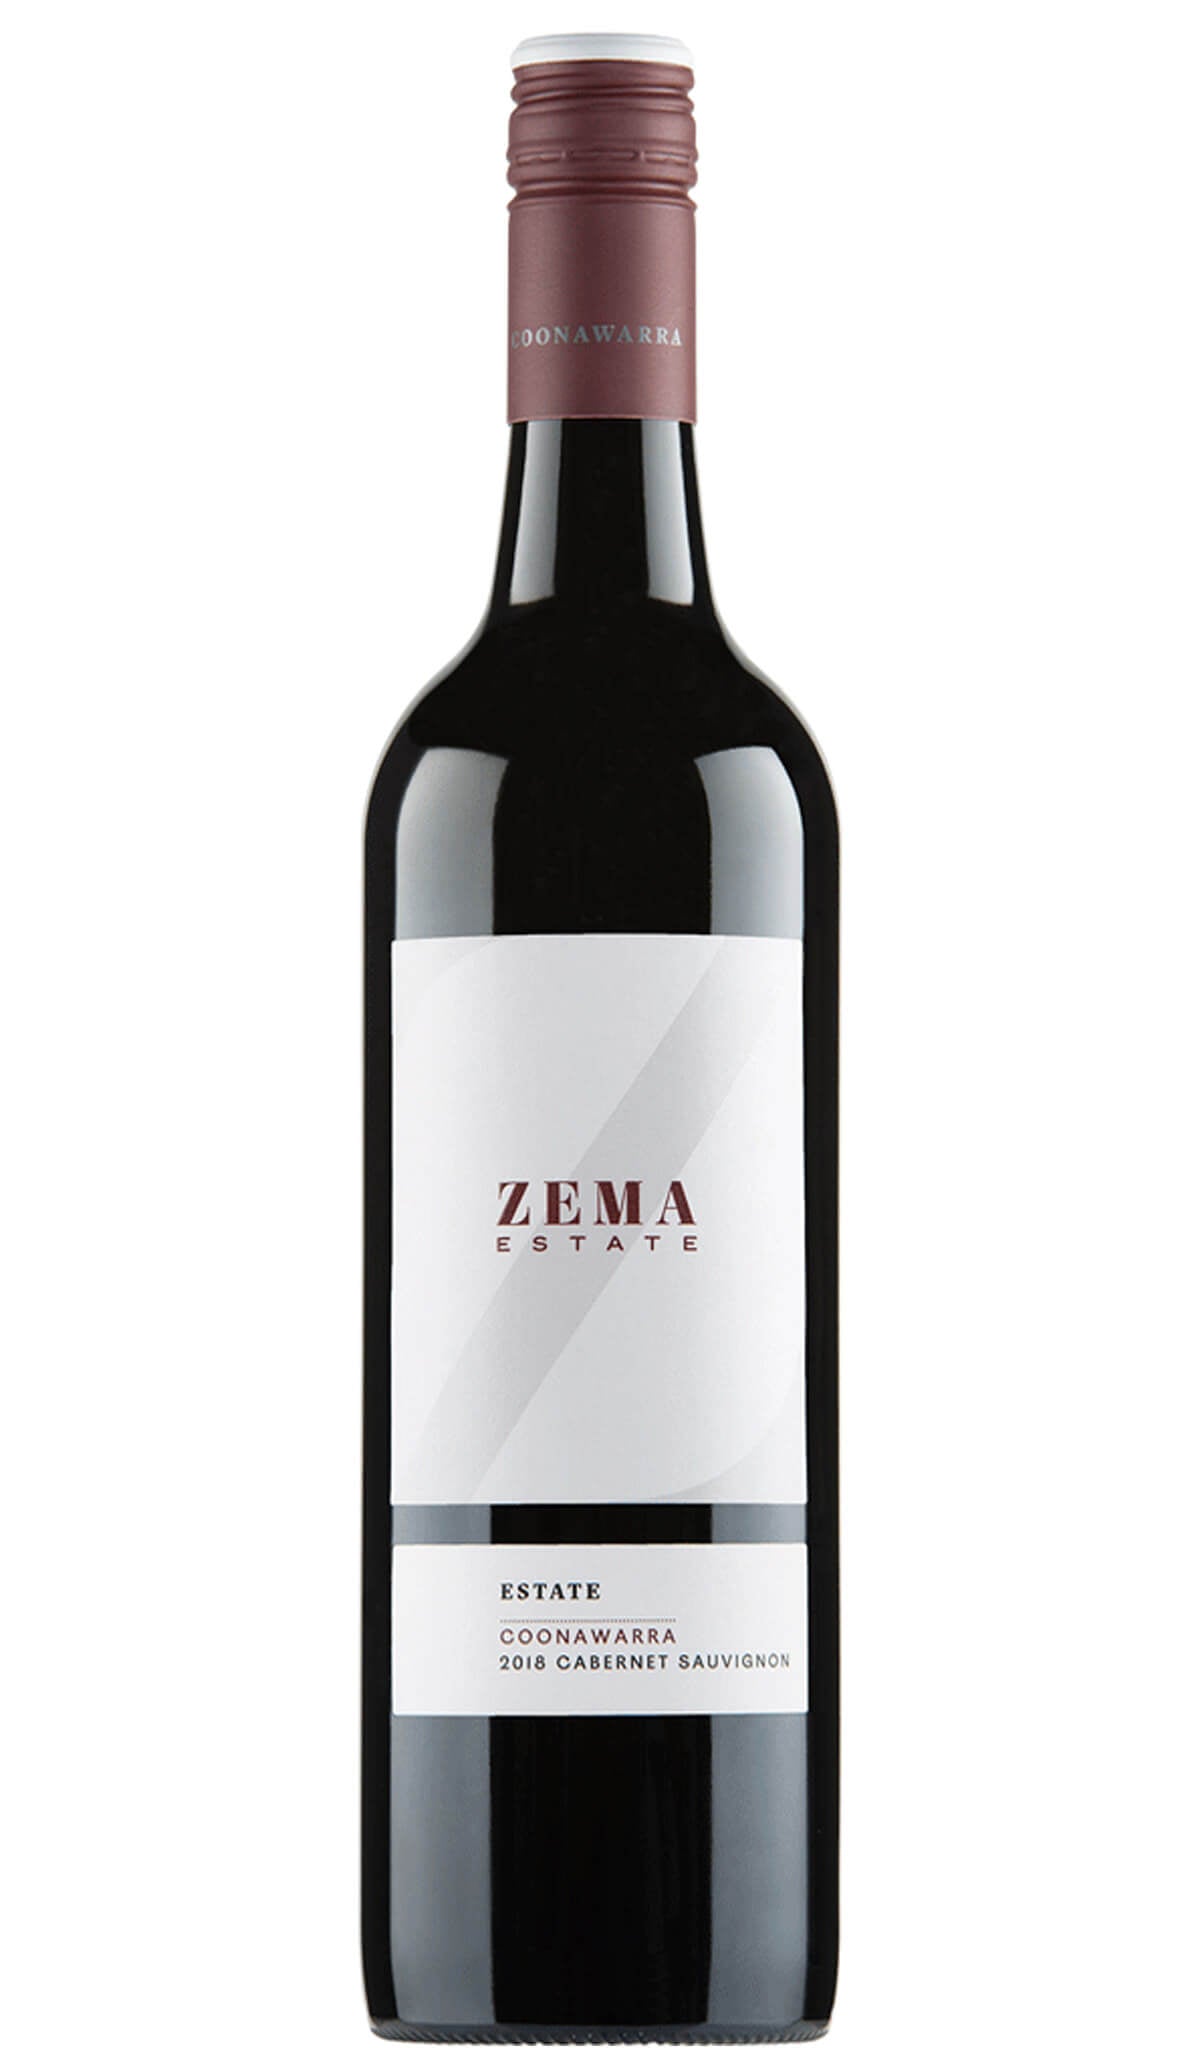 Find out more or buy Zema Estate Cabernet Sauvignon 2018 (Coonawarra) online at Wine Sellers Direct - Australia’s independent liquor specialists.